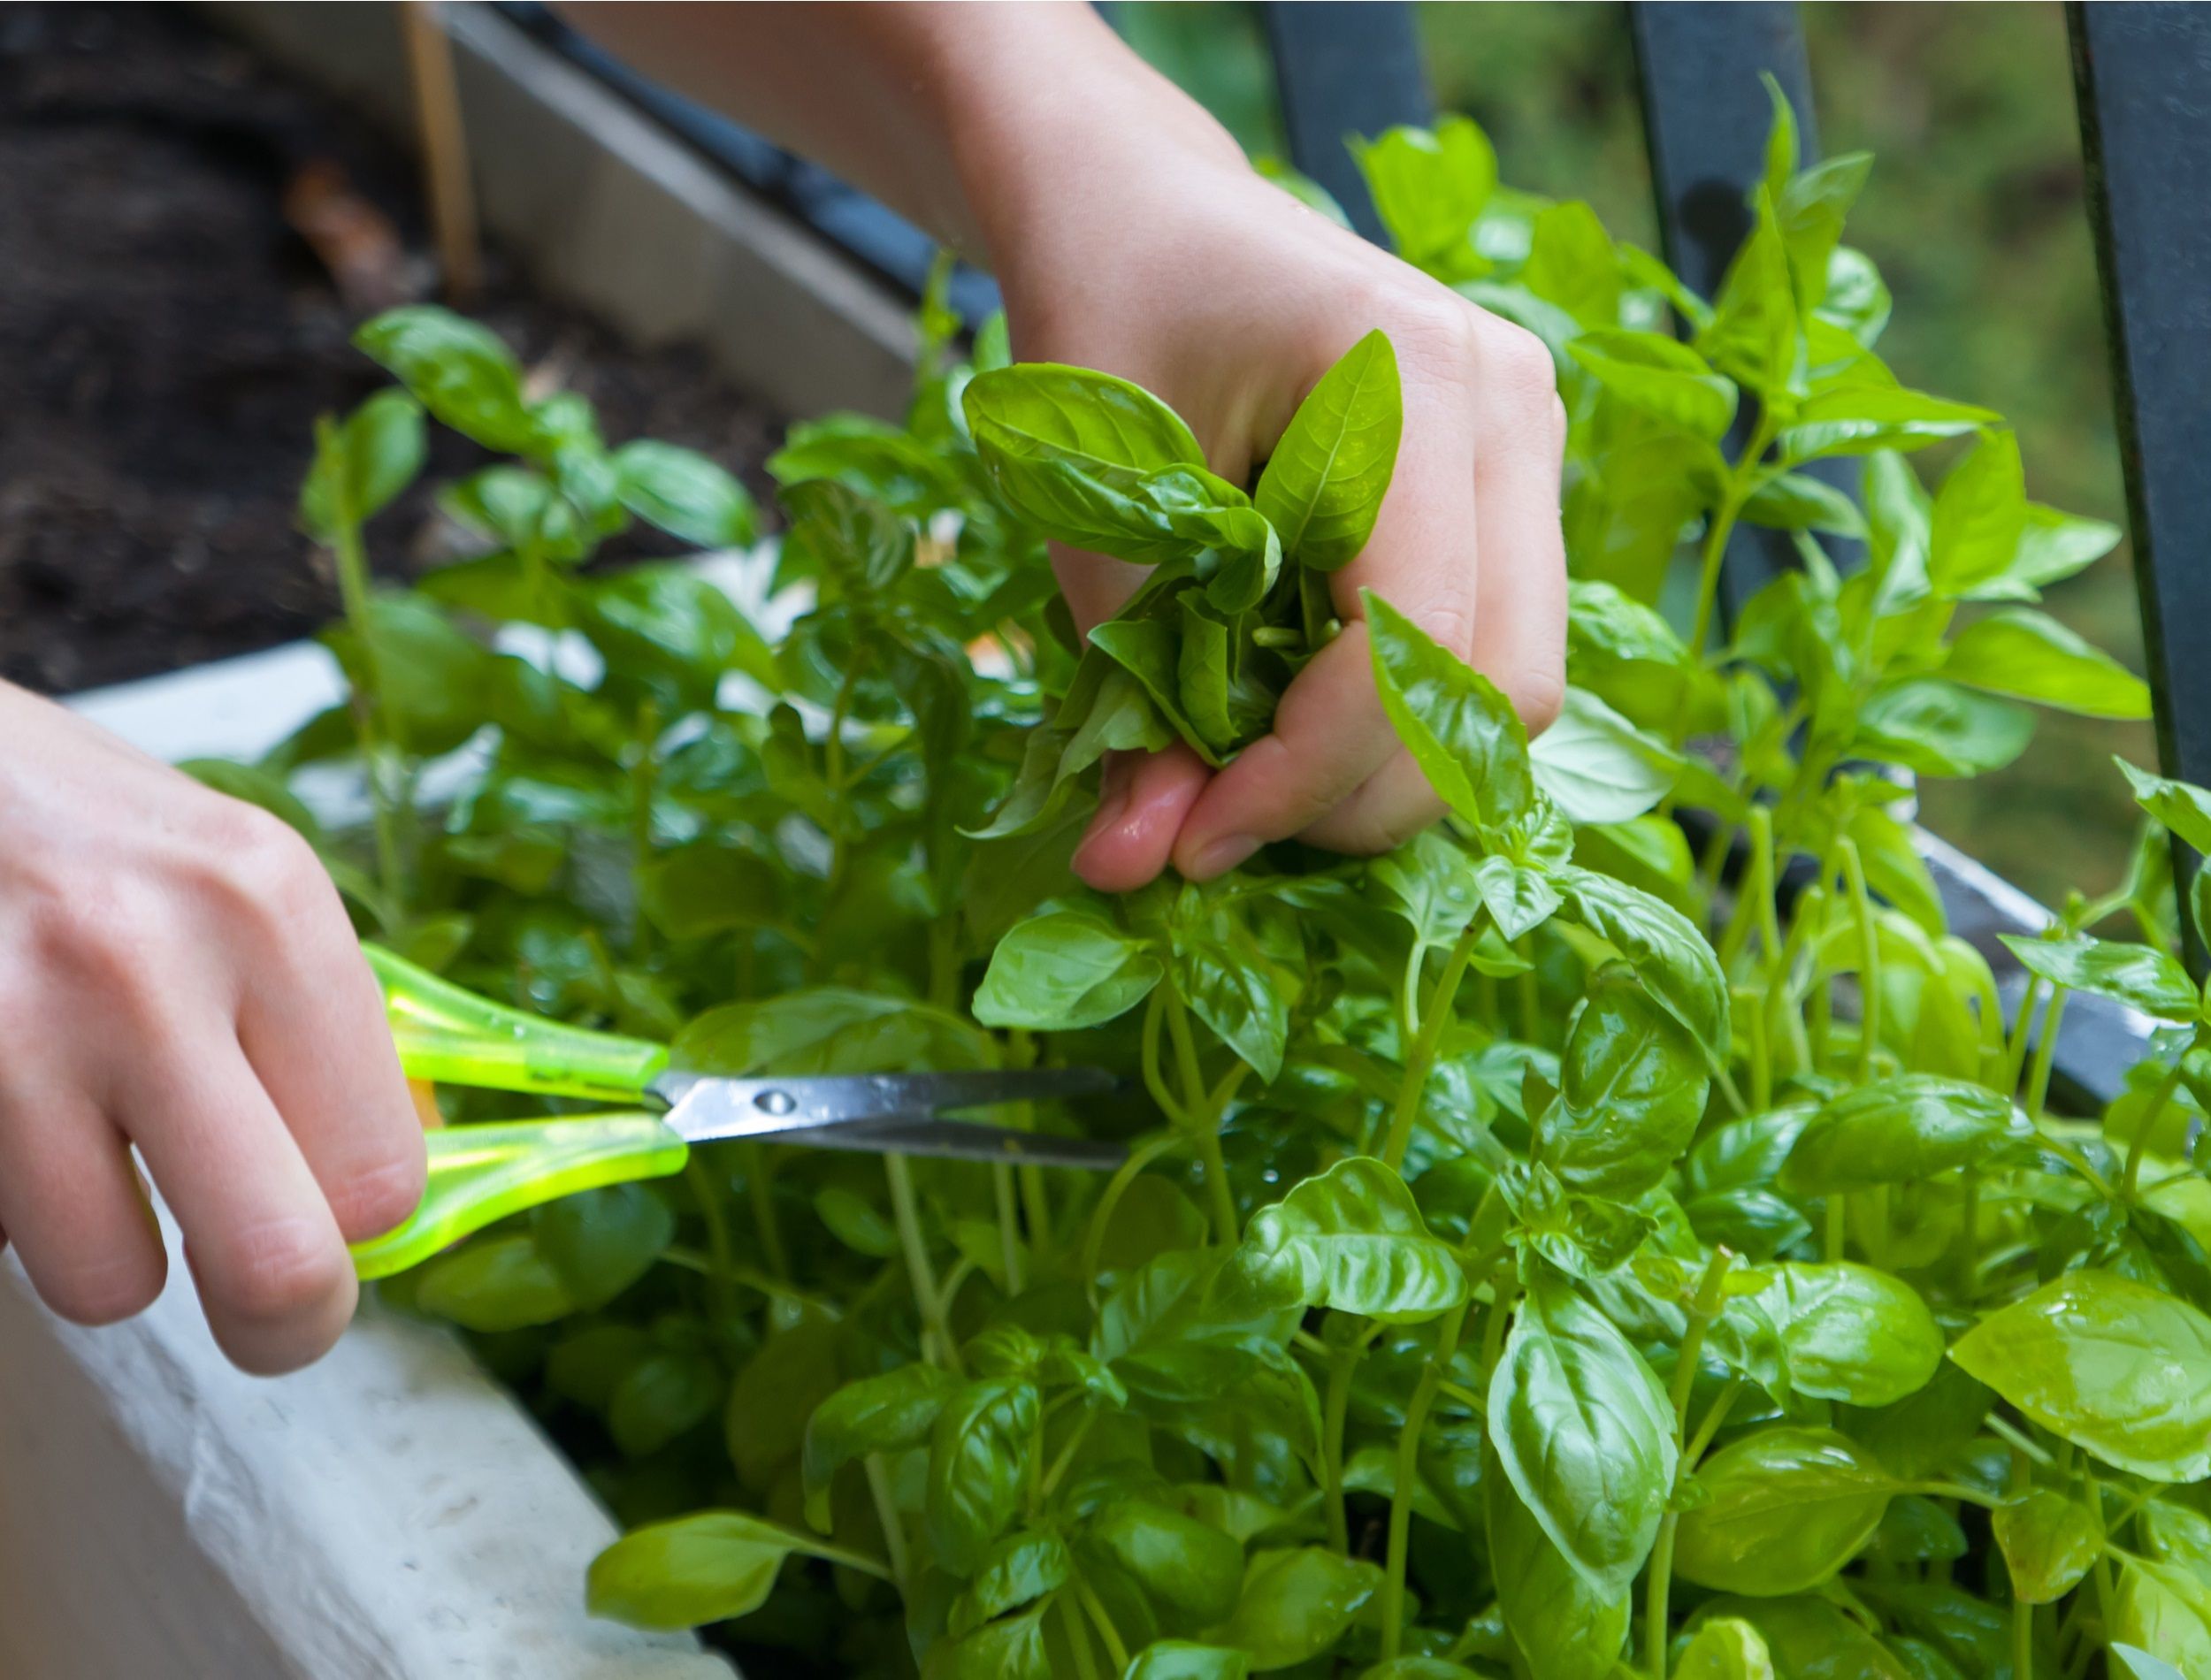 Home gardening, cutting herbs with paper scissors